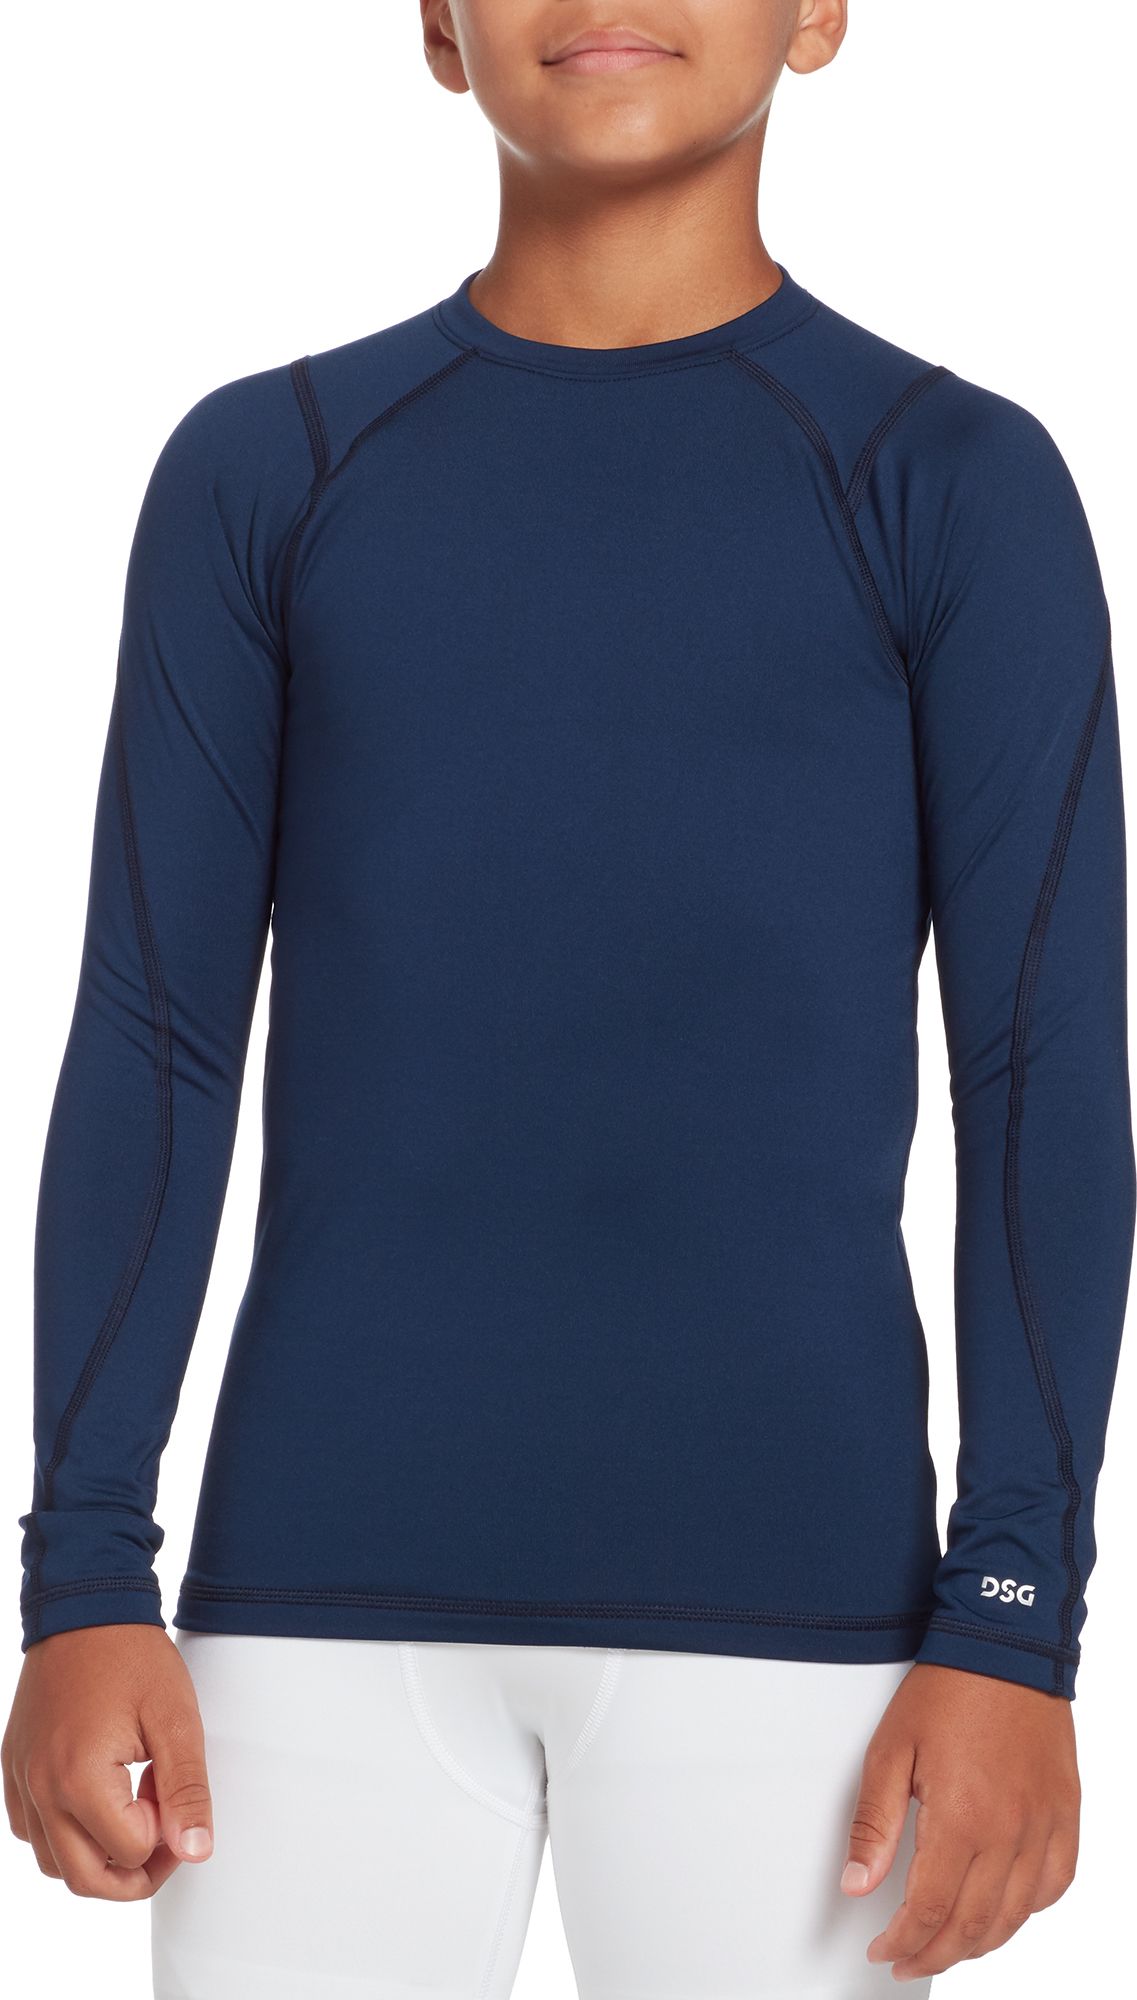 nike cold weather compression shirt